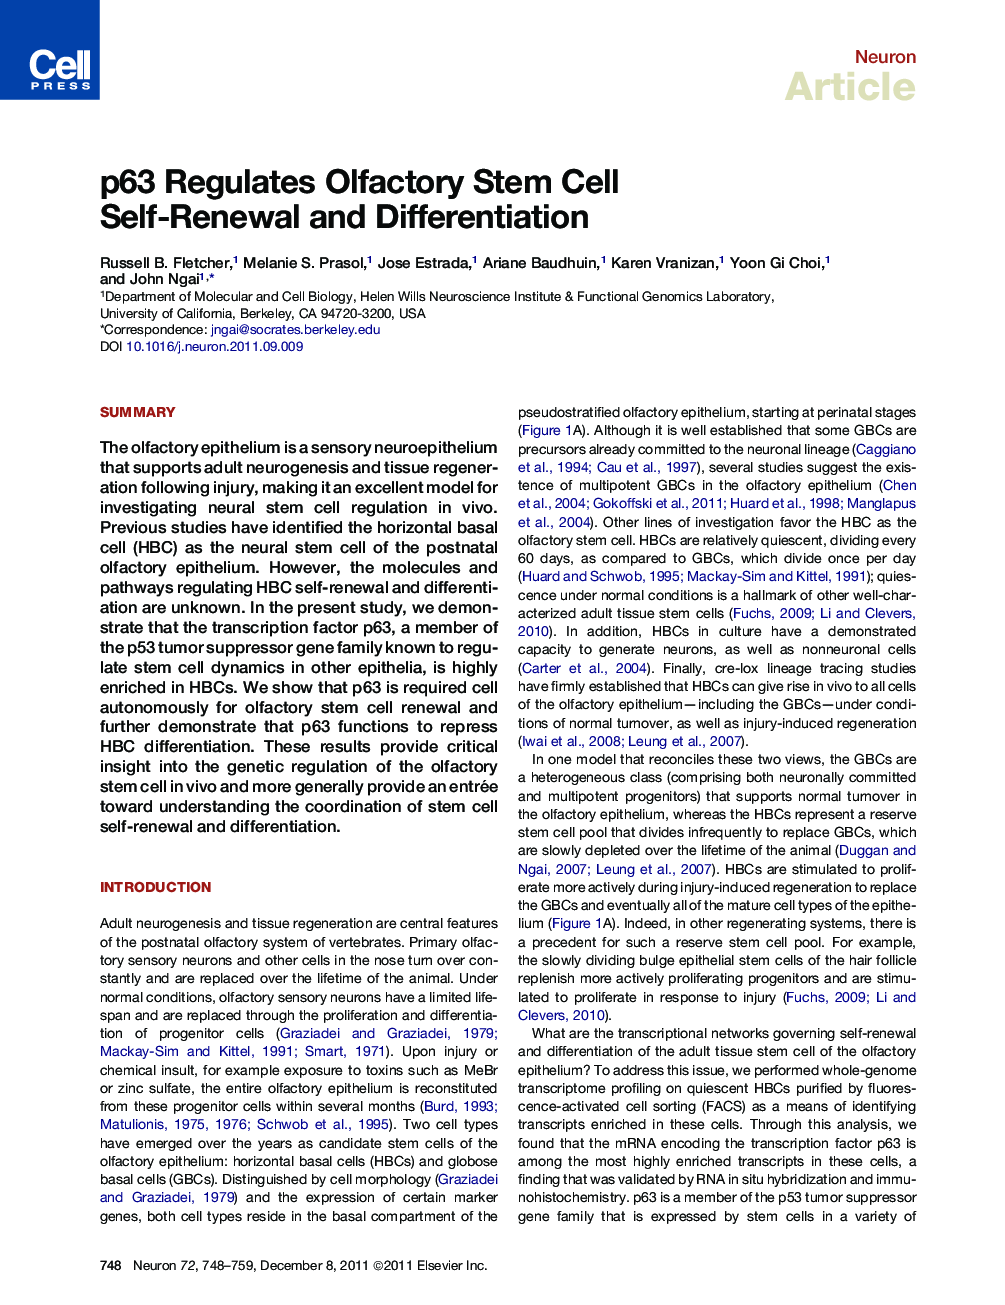 p63 Regulates Olfactory Stem Cell Self-Renewal and Differentiation